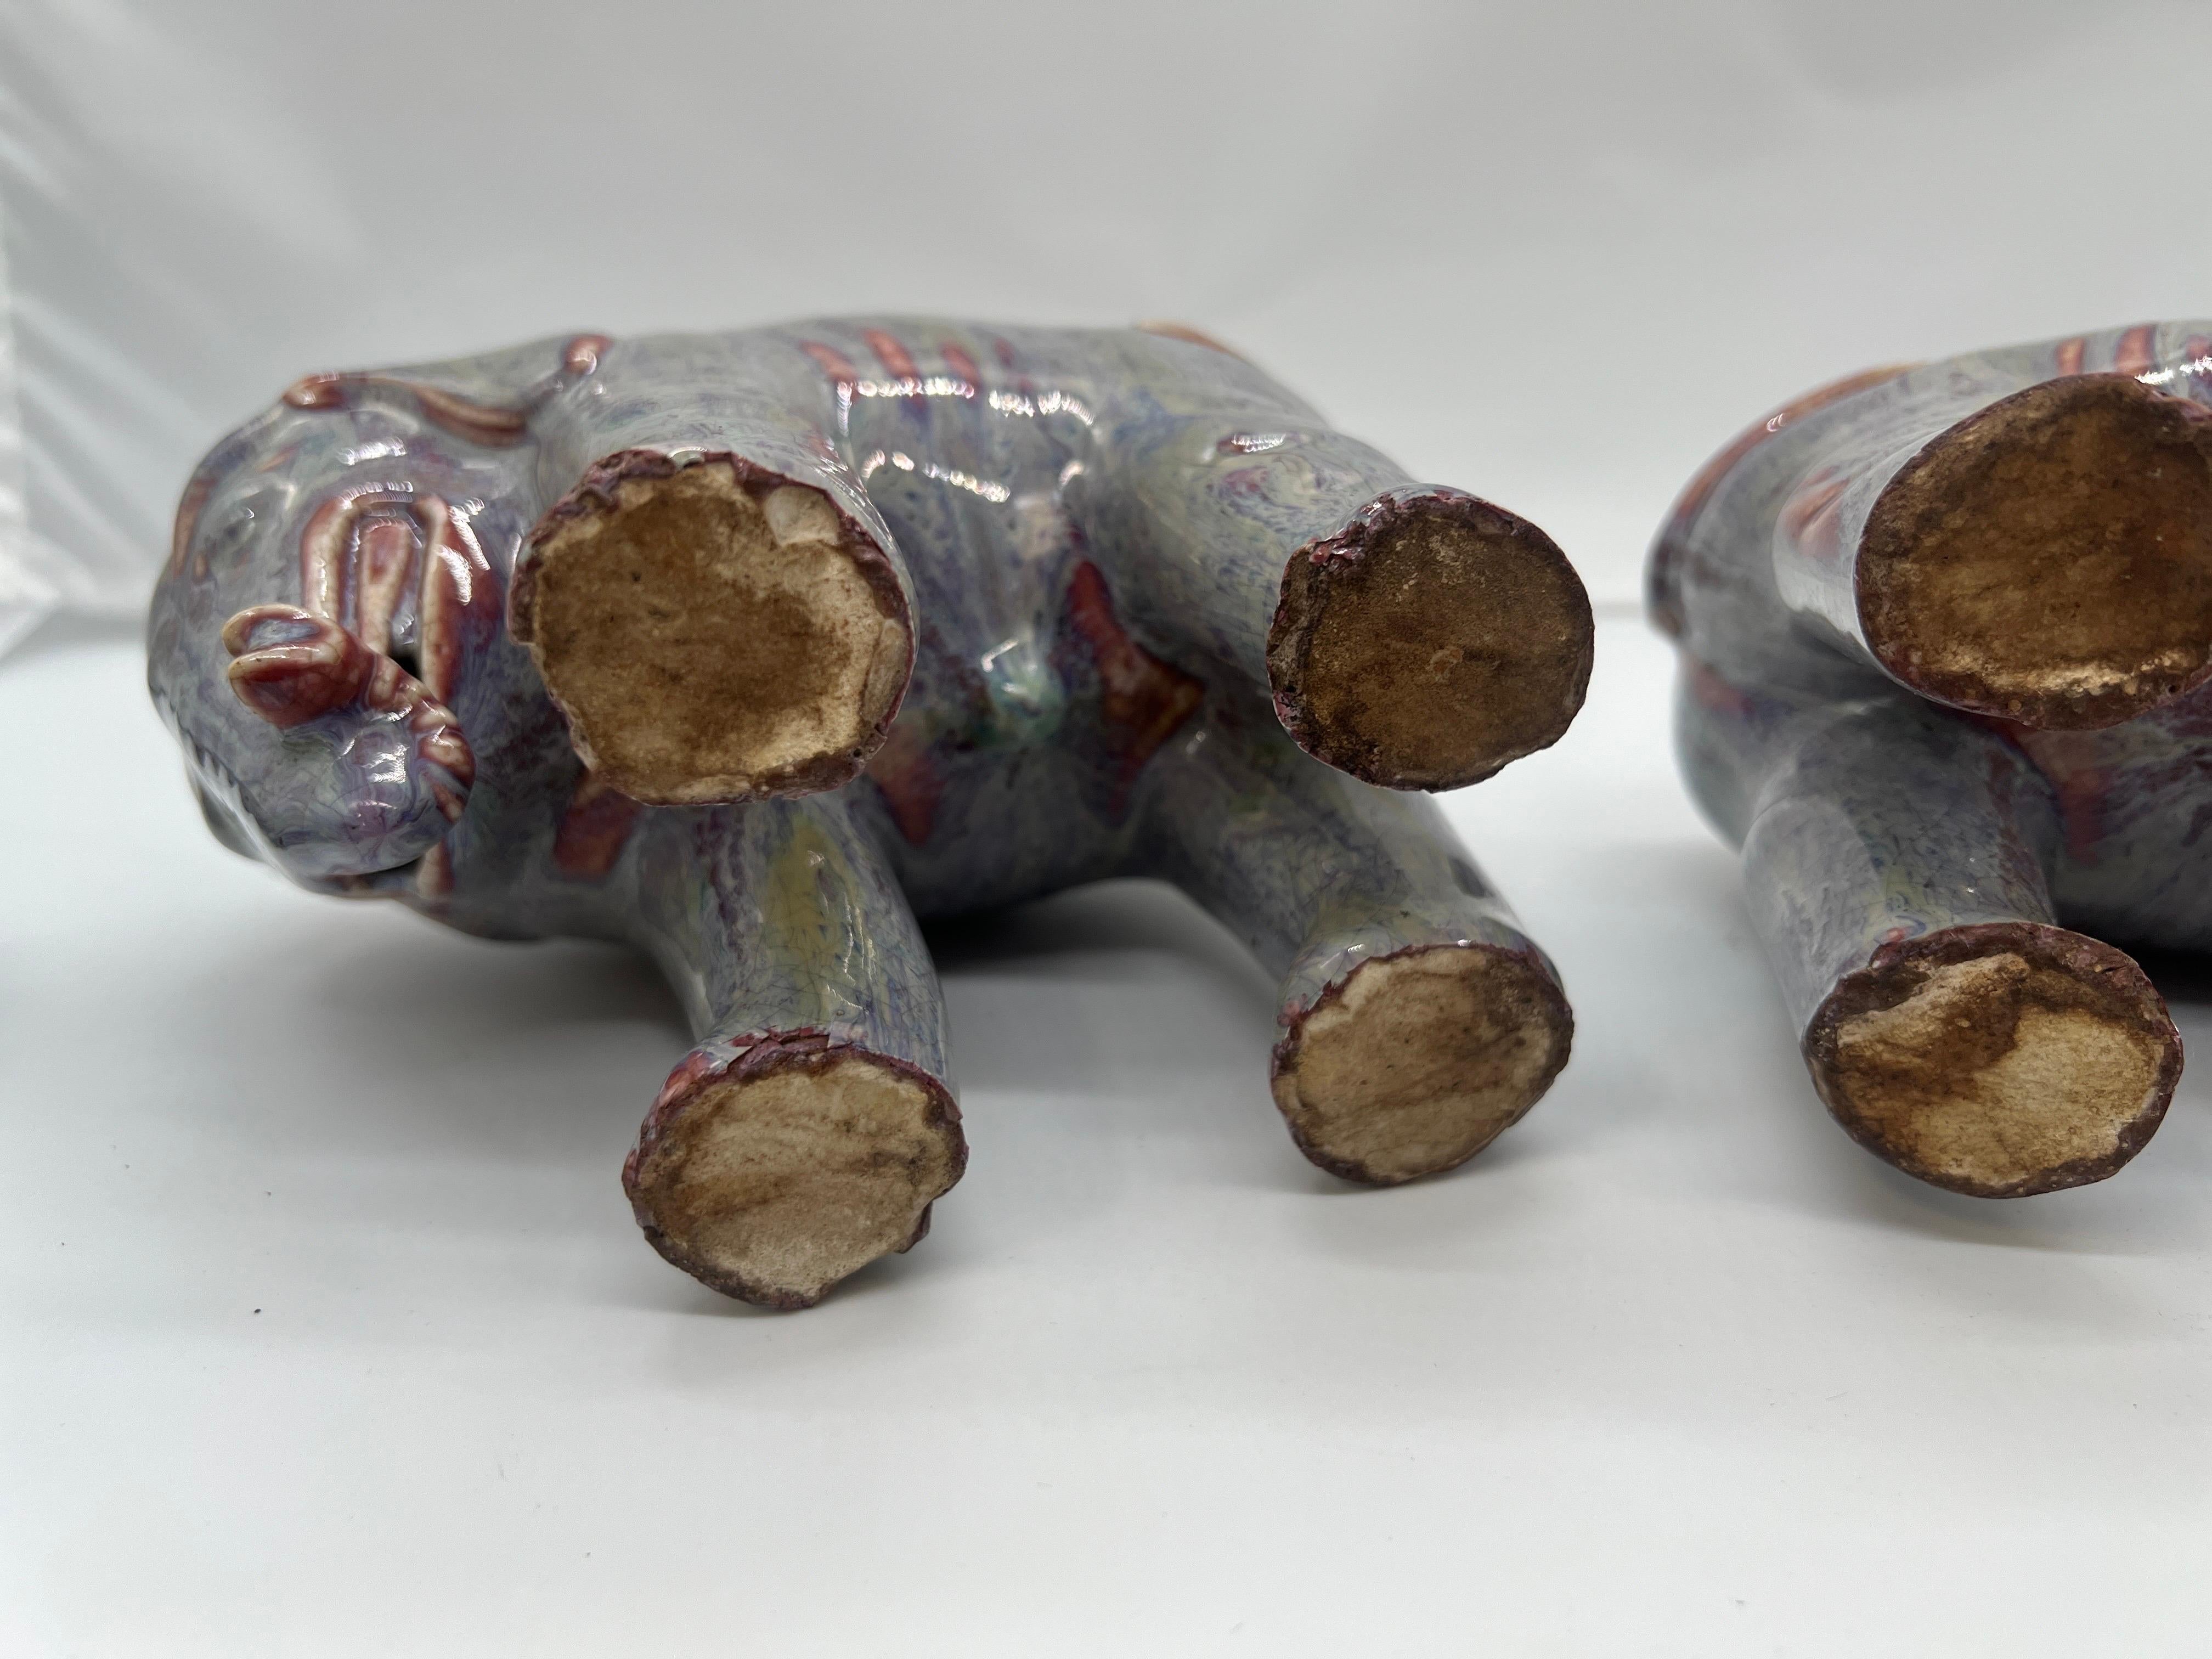 19th Century Magnificent Antique Chinese Porcelain Porcelain Flambe Glazed Elephants - Pair For Sale